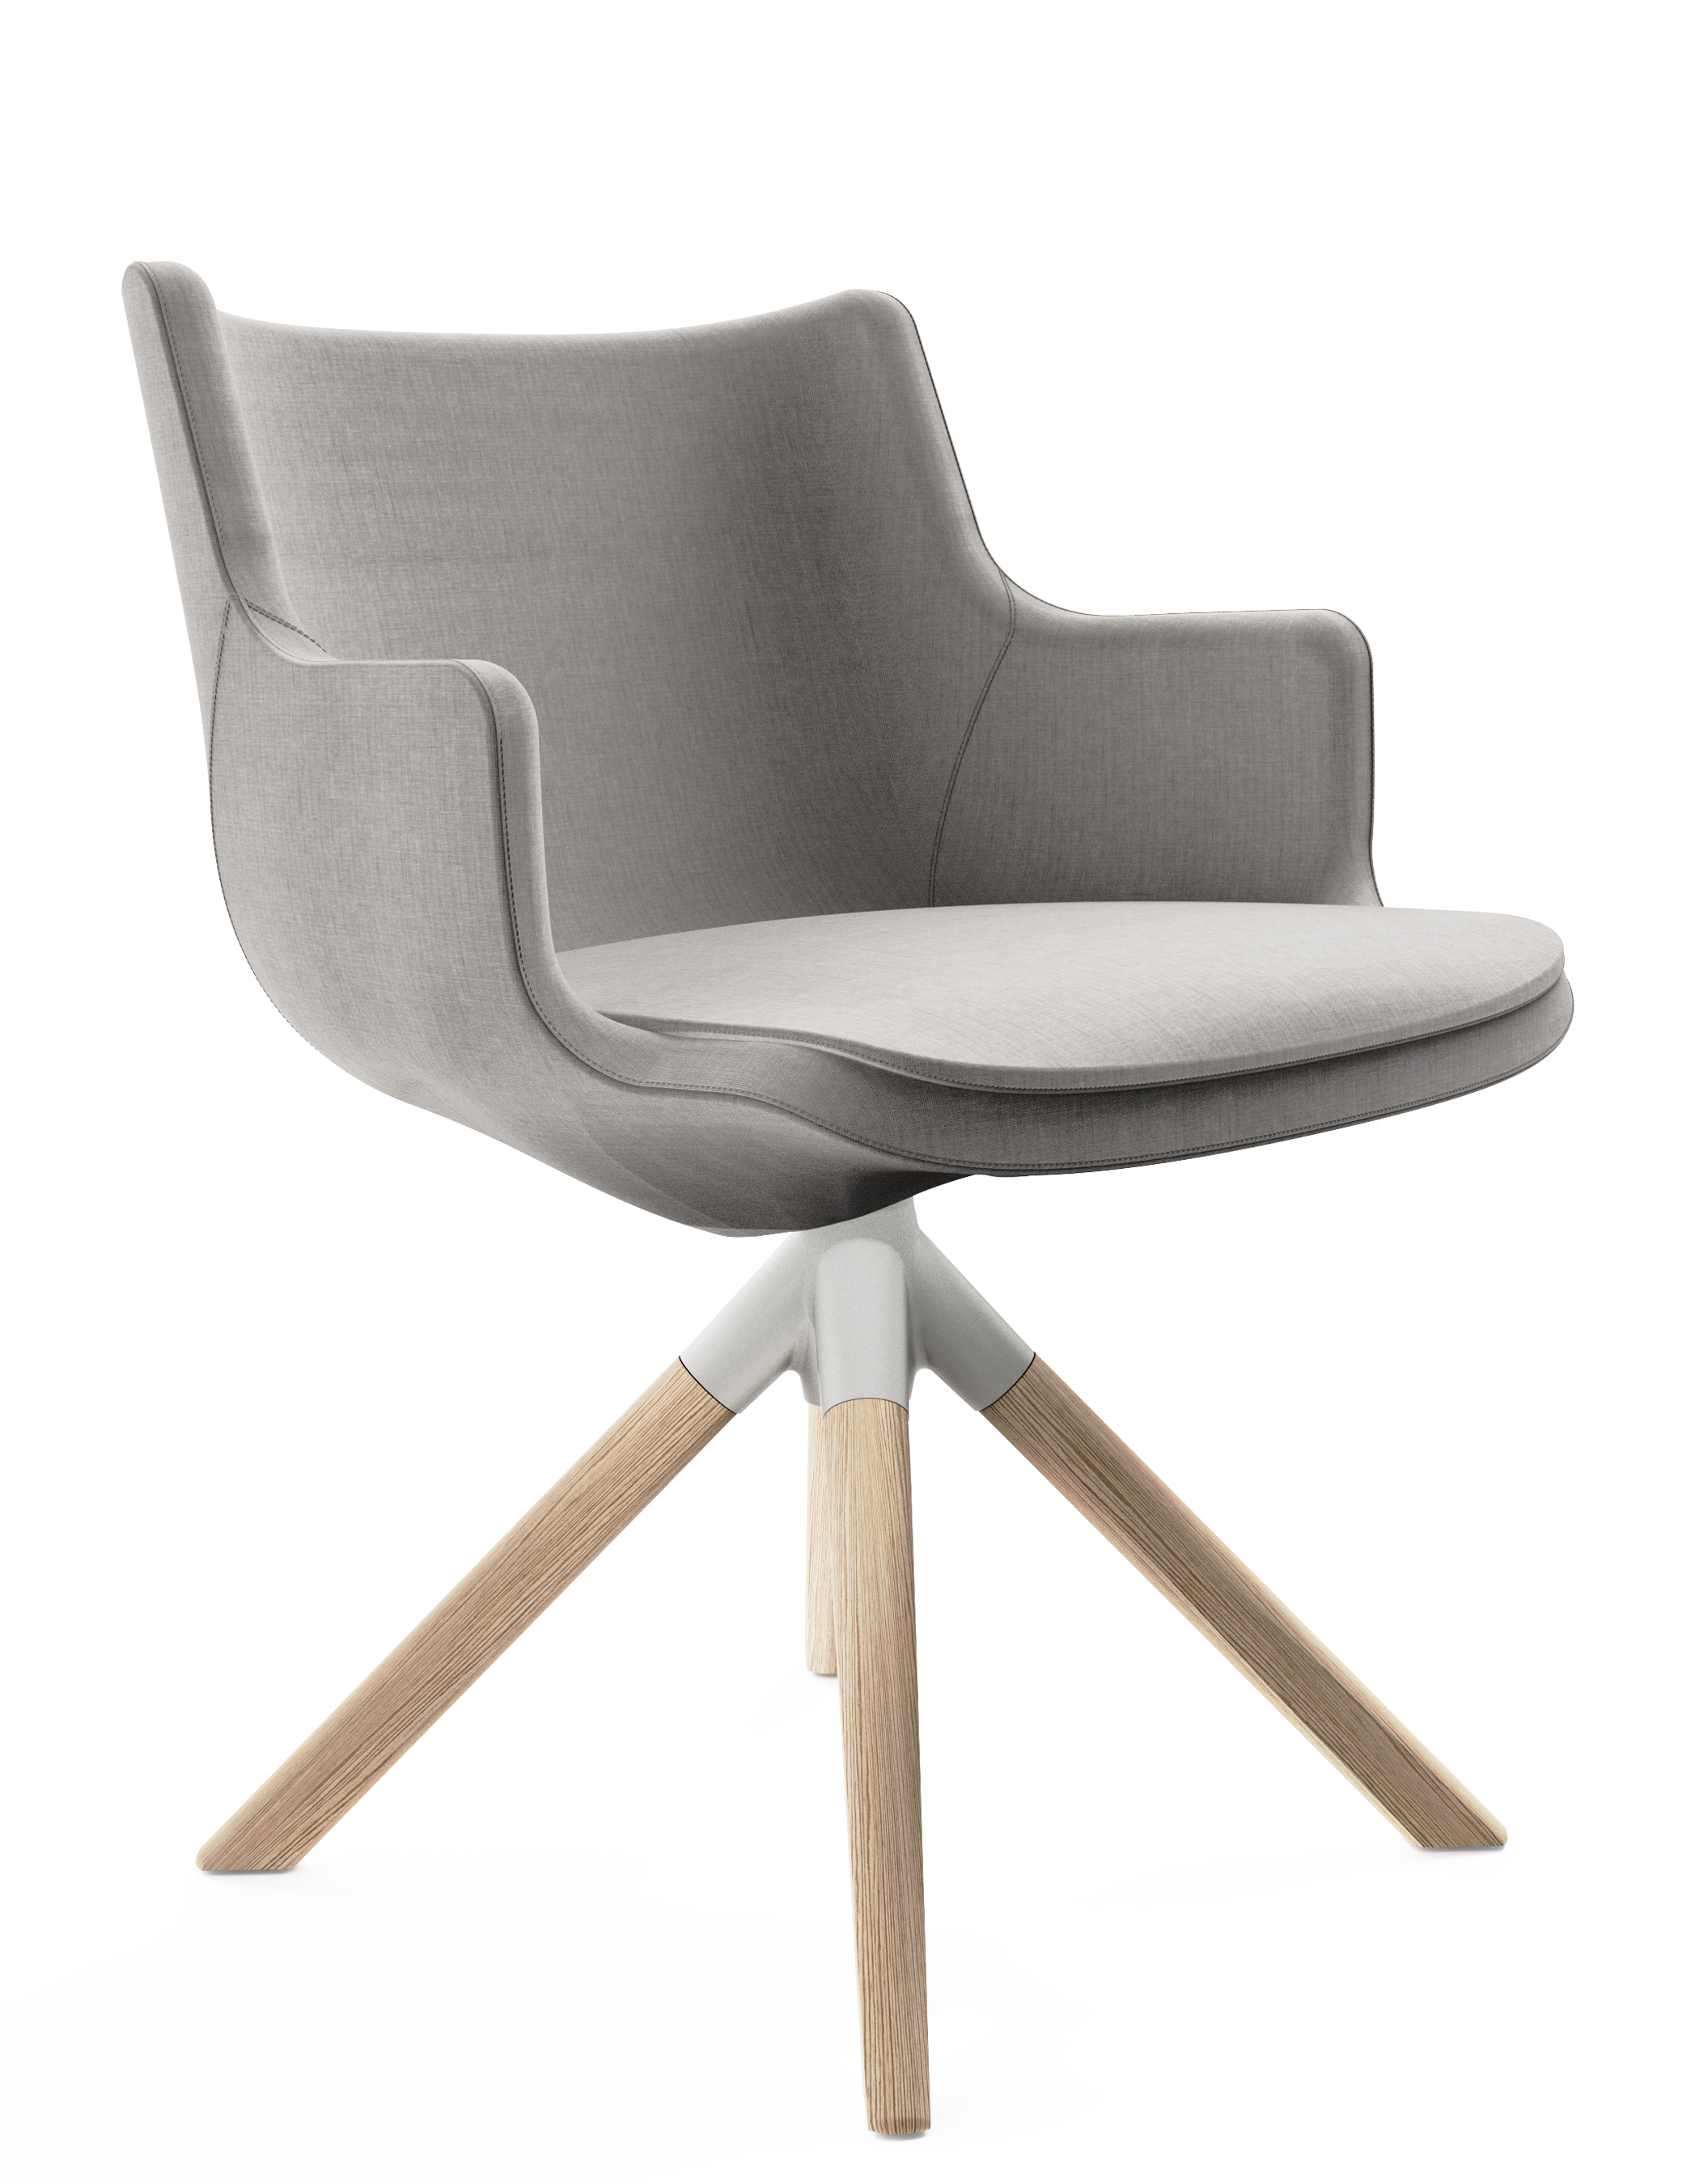 WS - Contour chair - Low, 4 star timber base (Front angle)